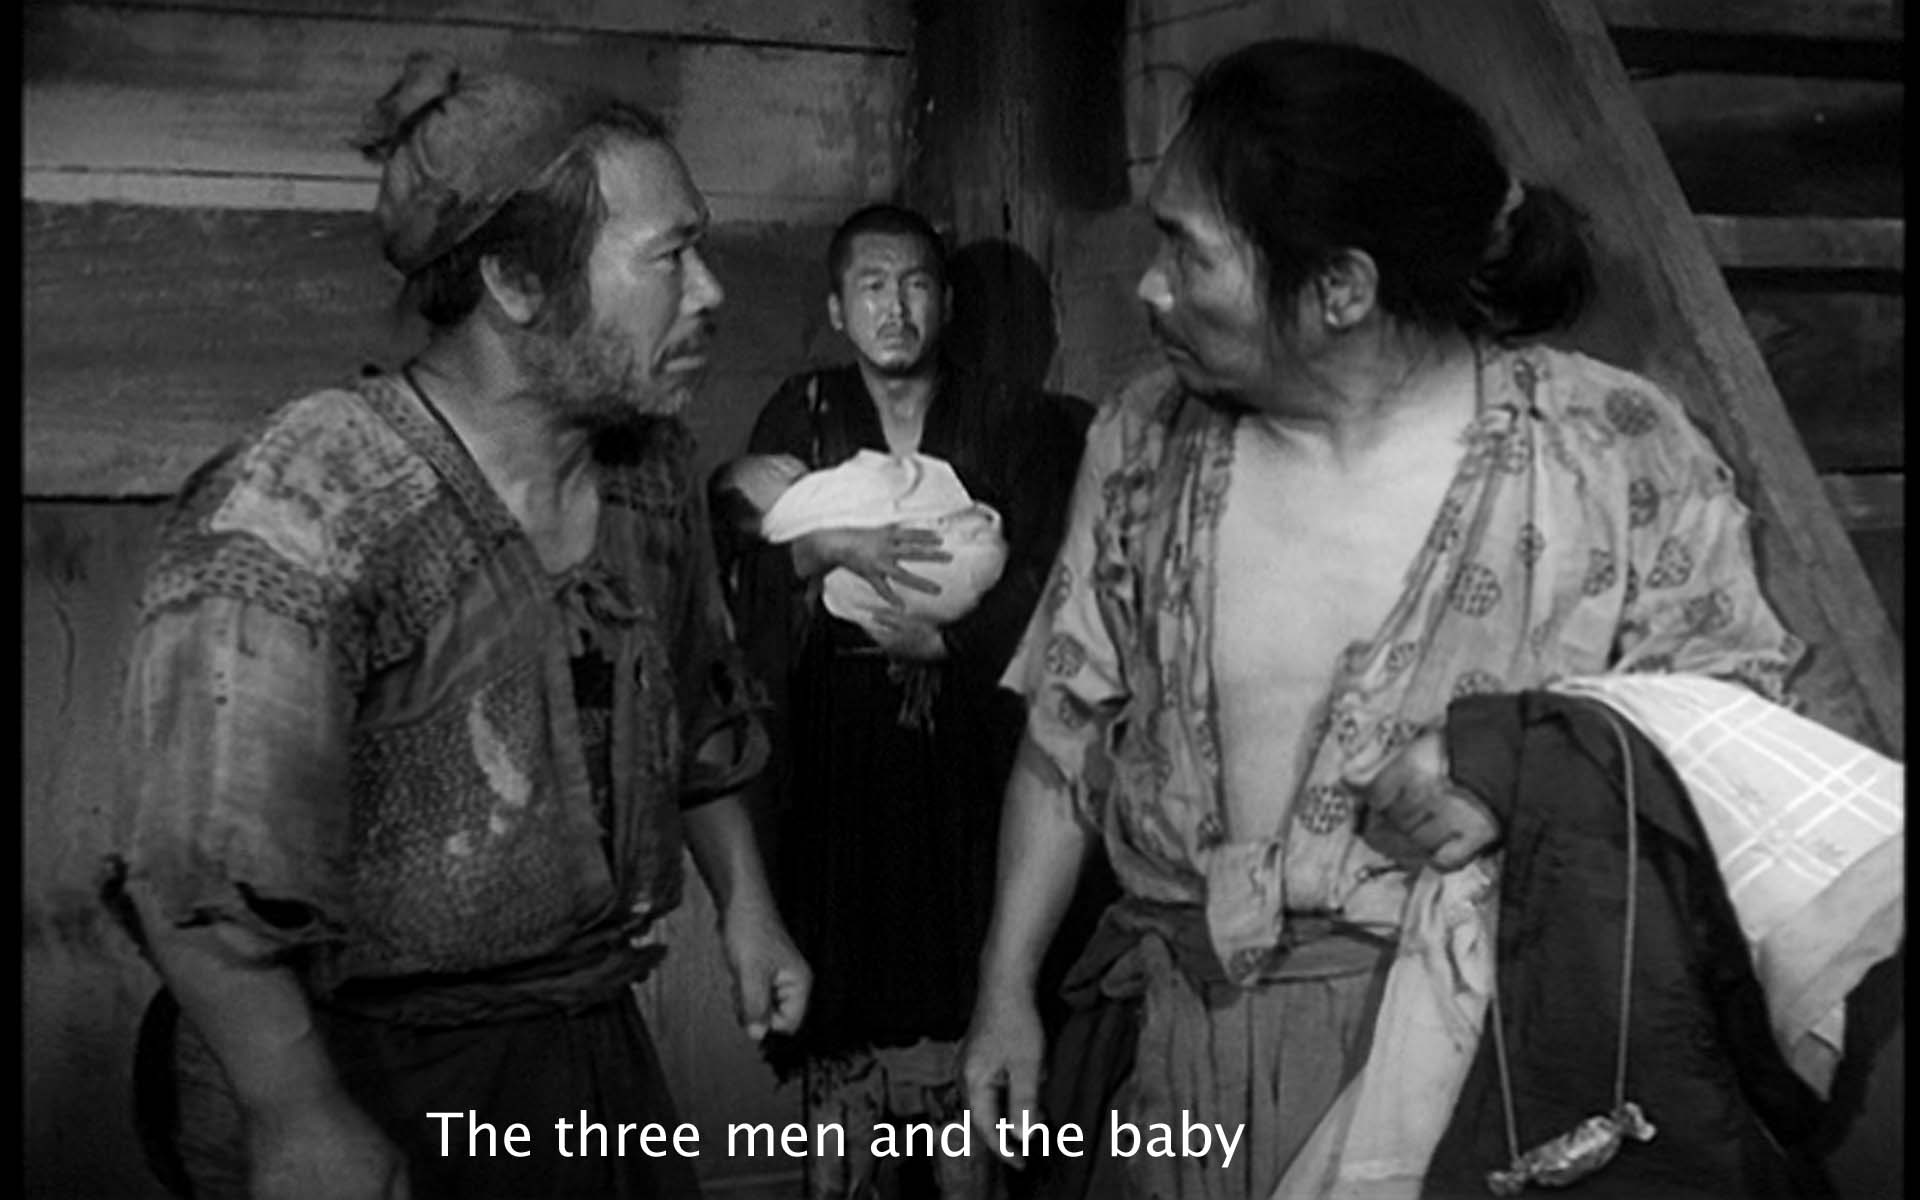 The three men and the baby